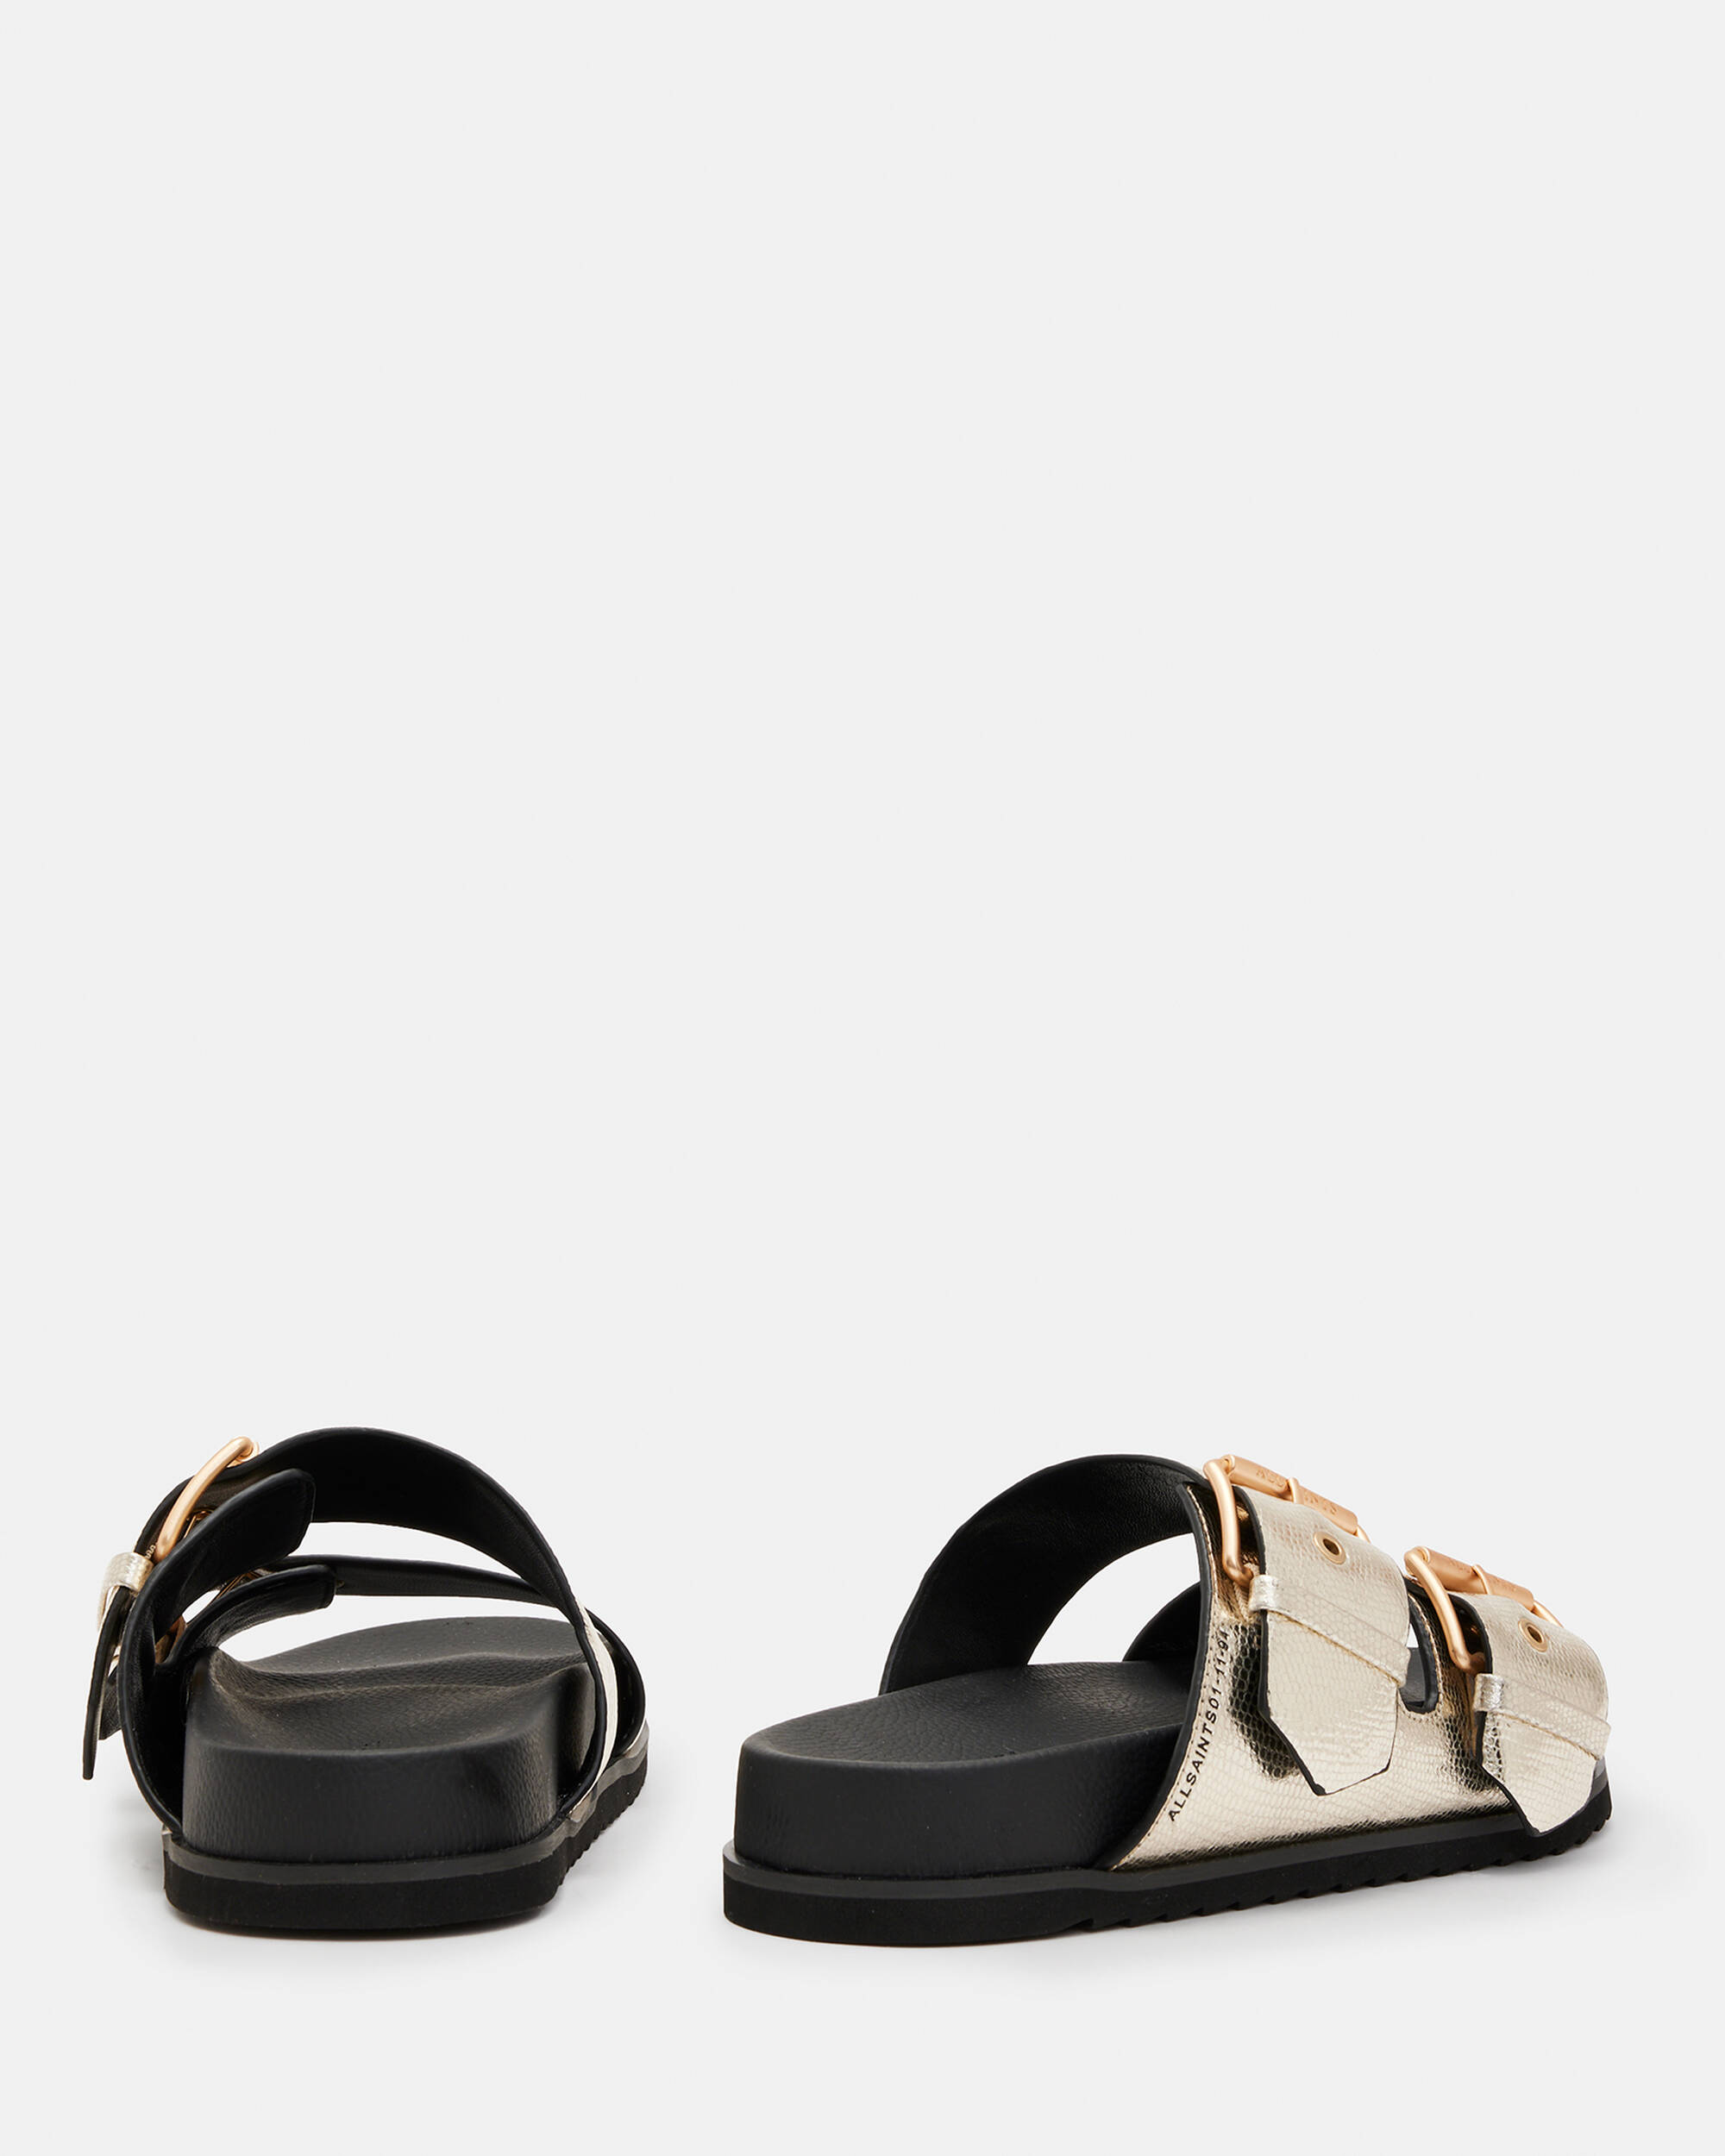 Sian Metallic Leather Sandals  large image number 8